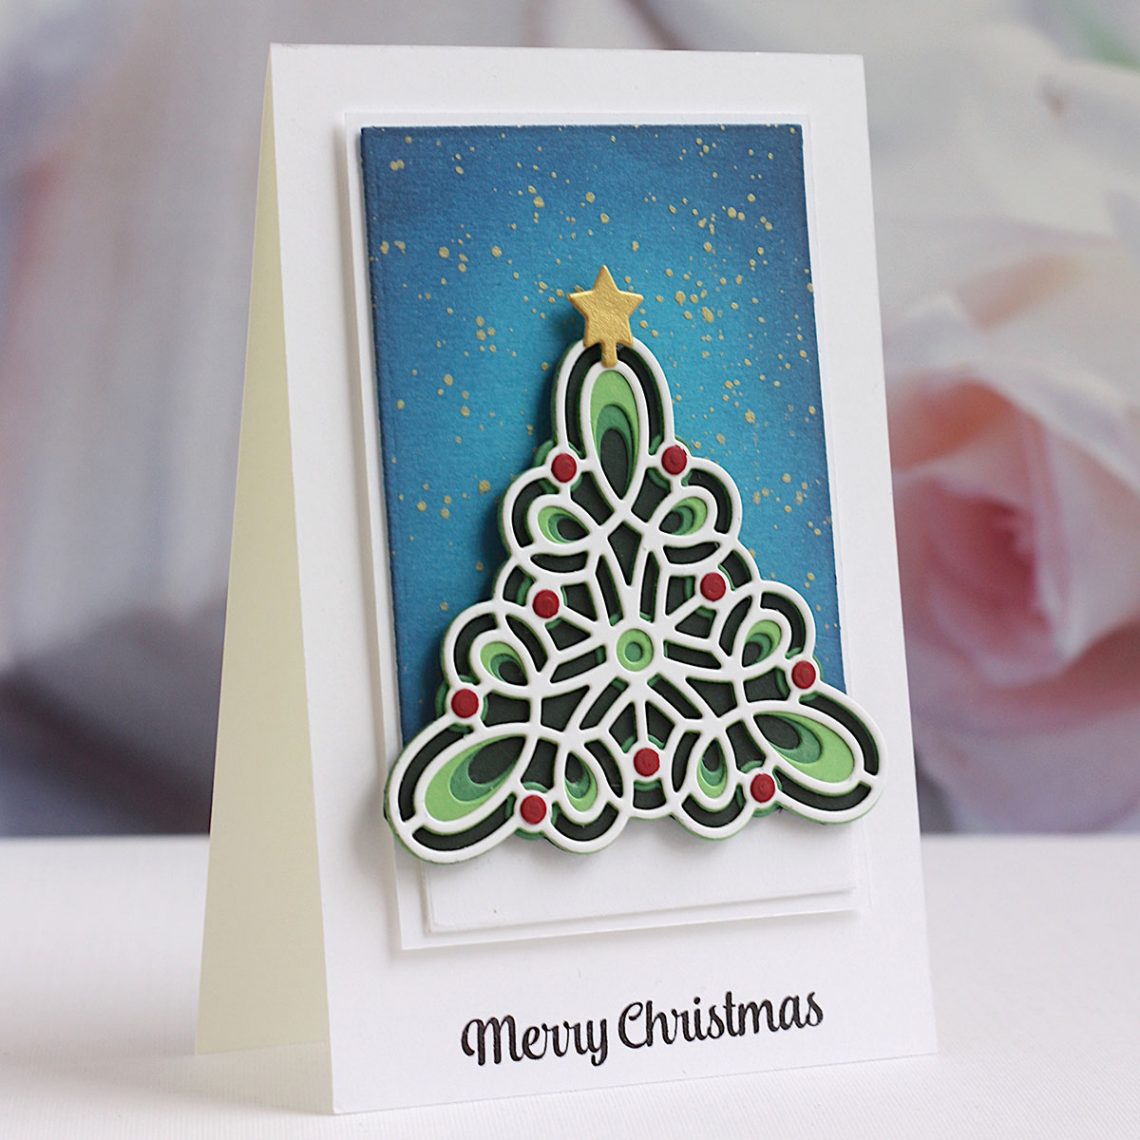 Spellbinders Sparkling Christmas Collection – Cardmaking Inspiration with Karin Åkesdotter #Spellbinders #NeverStopMaking #Christmascardmaking #Cardmaking